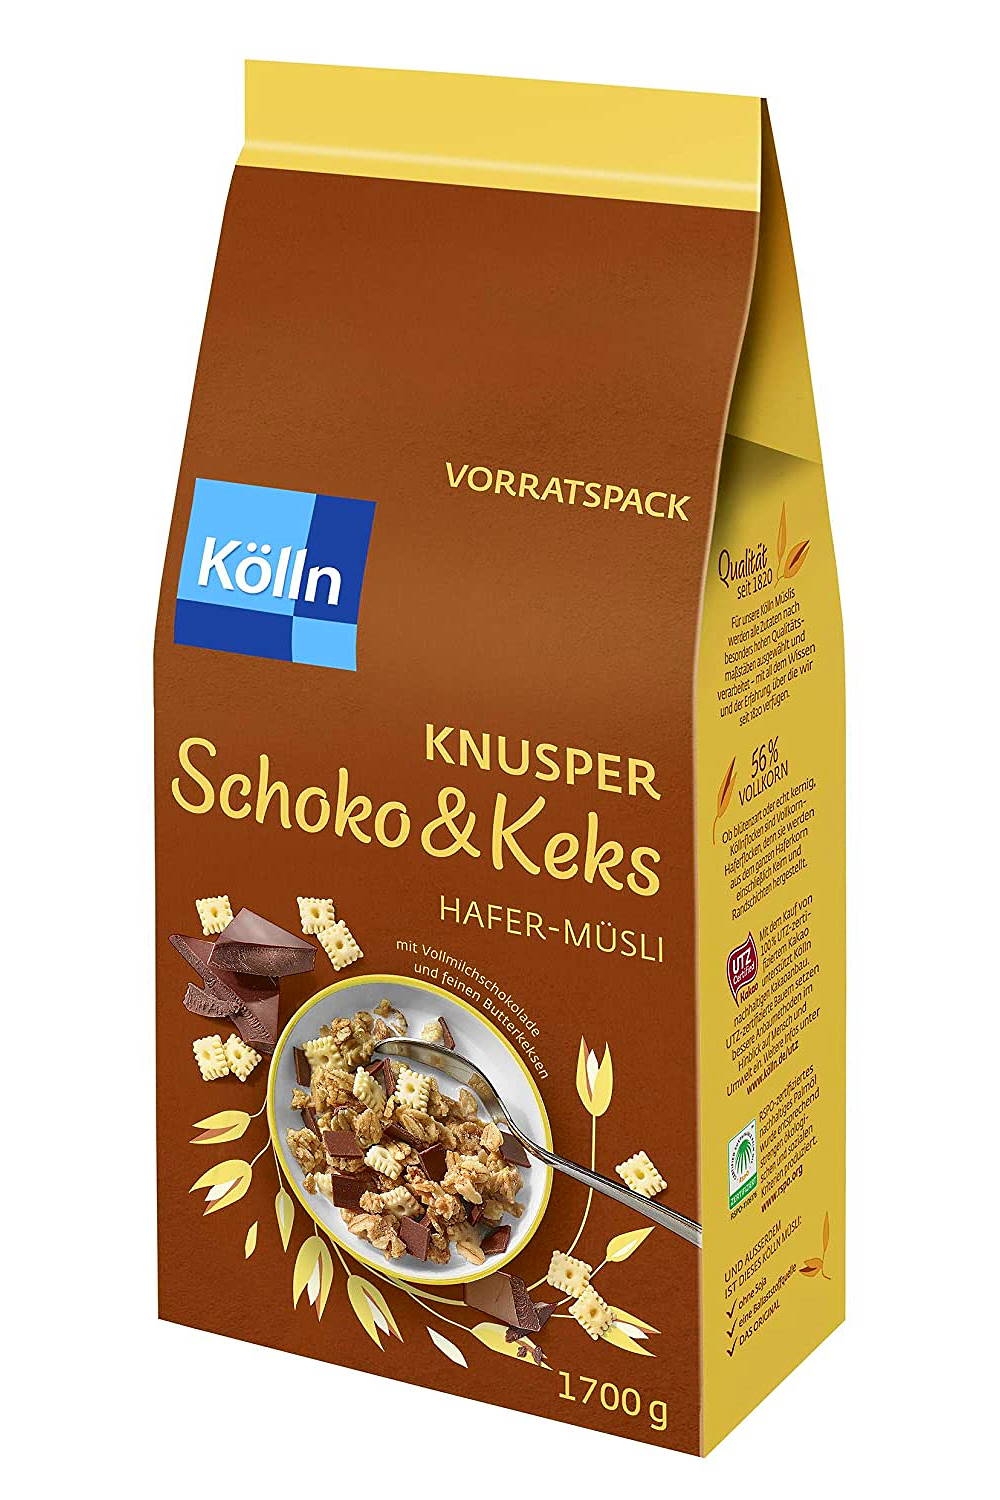 kg and with 1.7 biscuit Whole-wheat crispy Kölln muesli chocolate